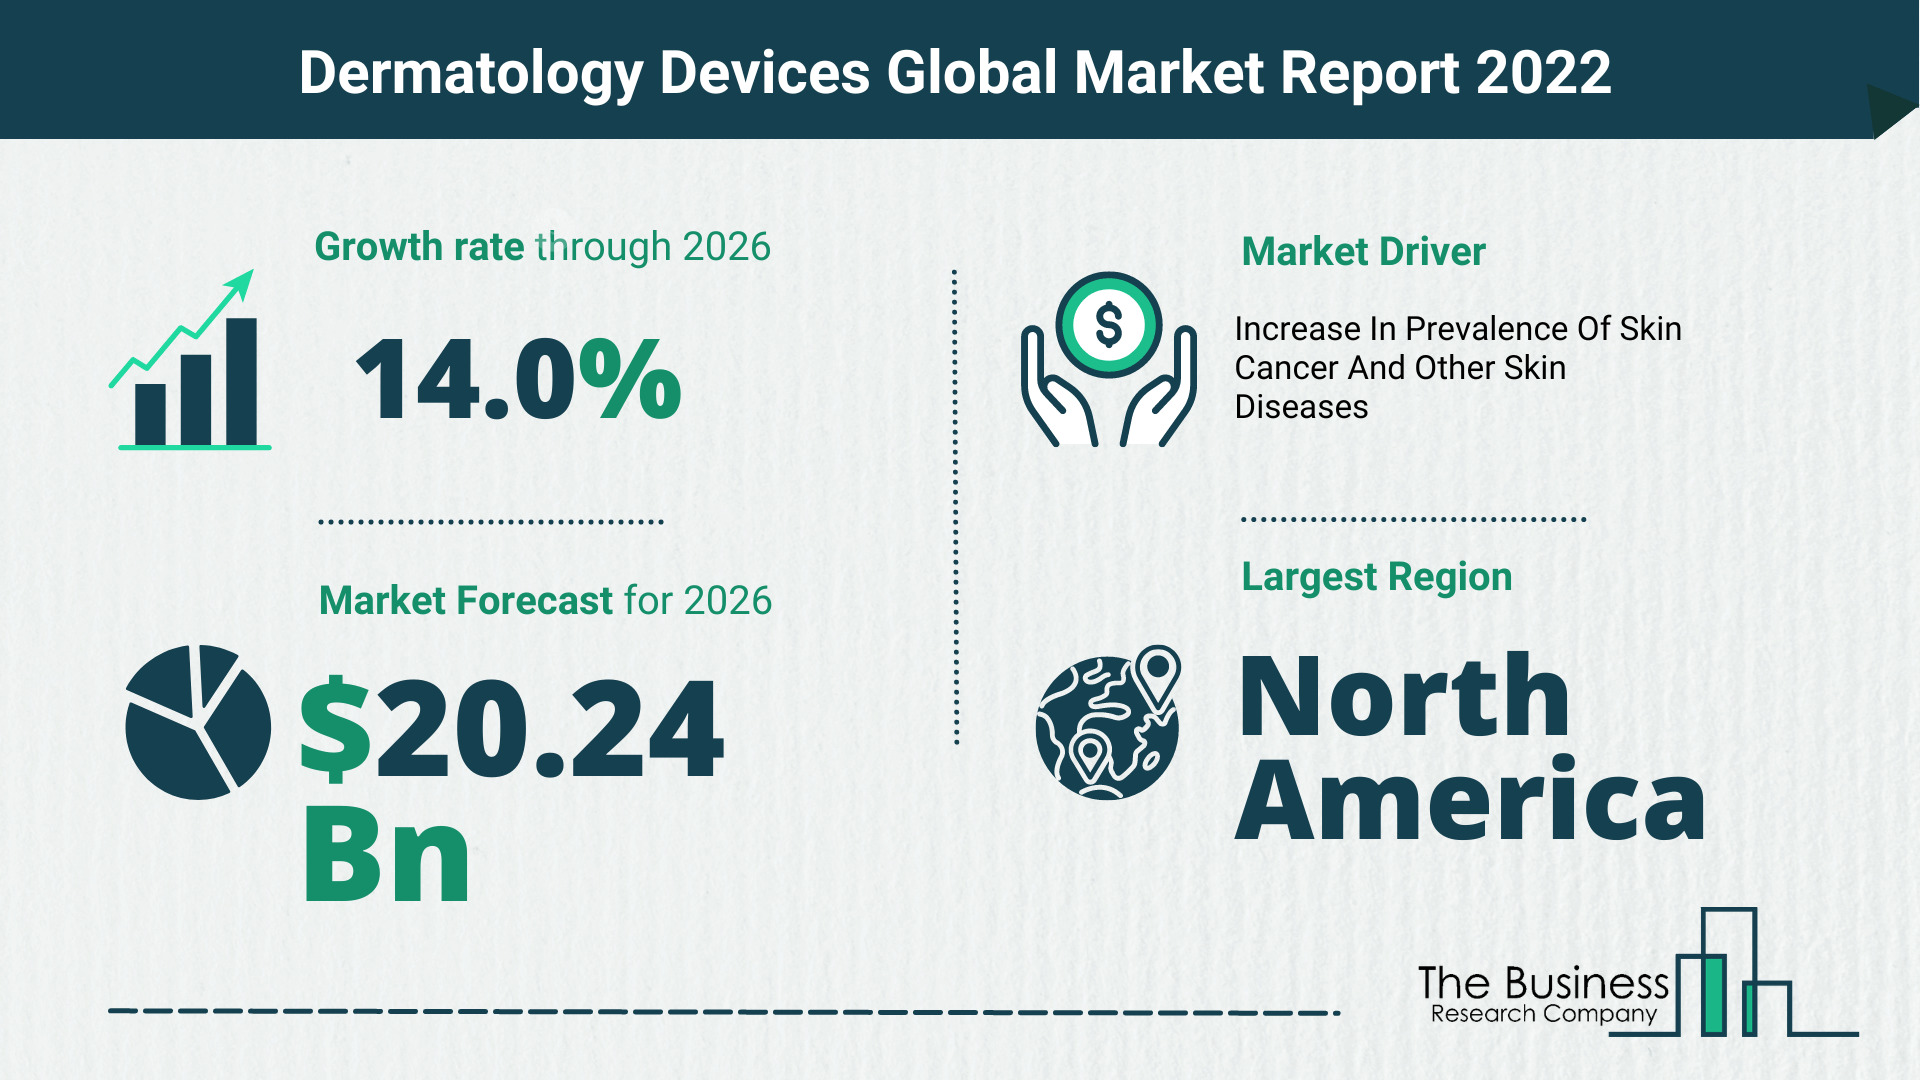 What Is The Dermatology Devices Market Overview In 2022?